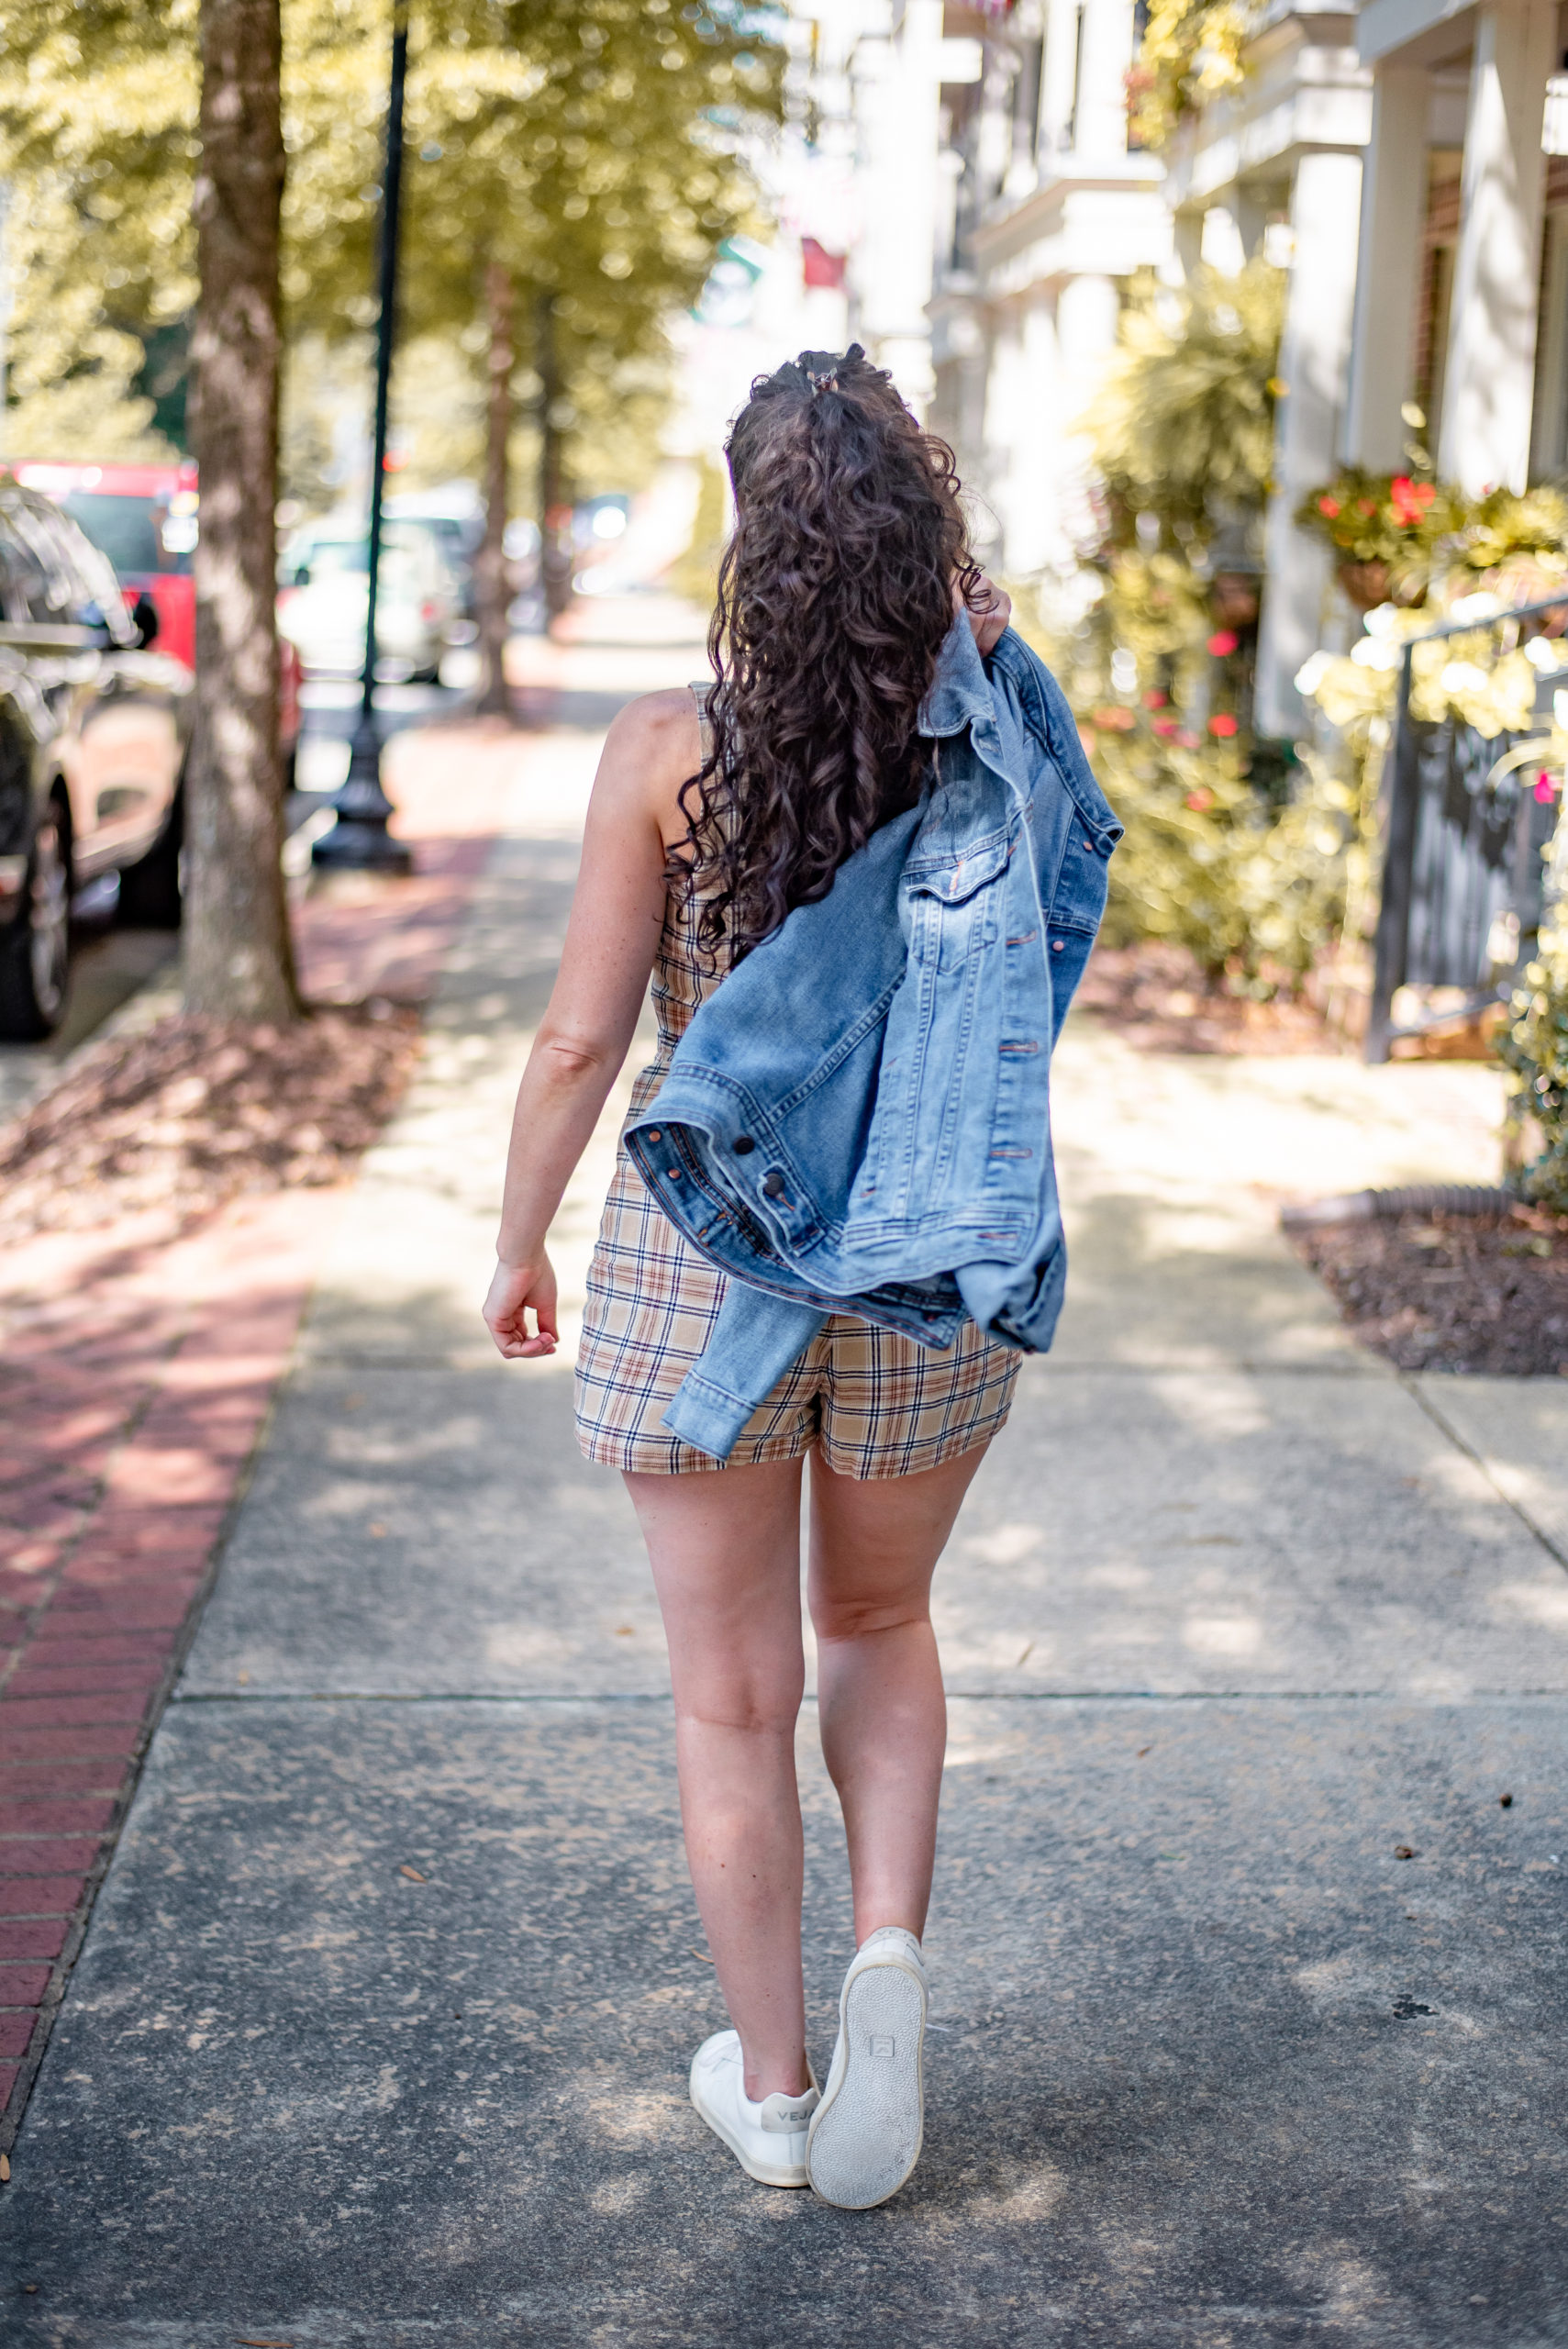 day to night style, Plaid jumper, skort romper, day to night outfit ideas, how to transform your day outfit into a night outfit, fall outfit ideas that are affordable, best atlanta style bloggers, top bloggers in atlanta, style and travel blogs